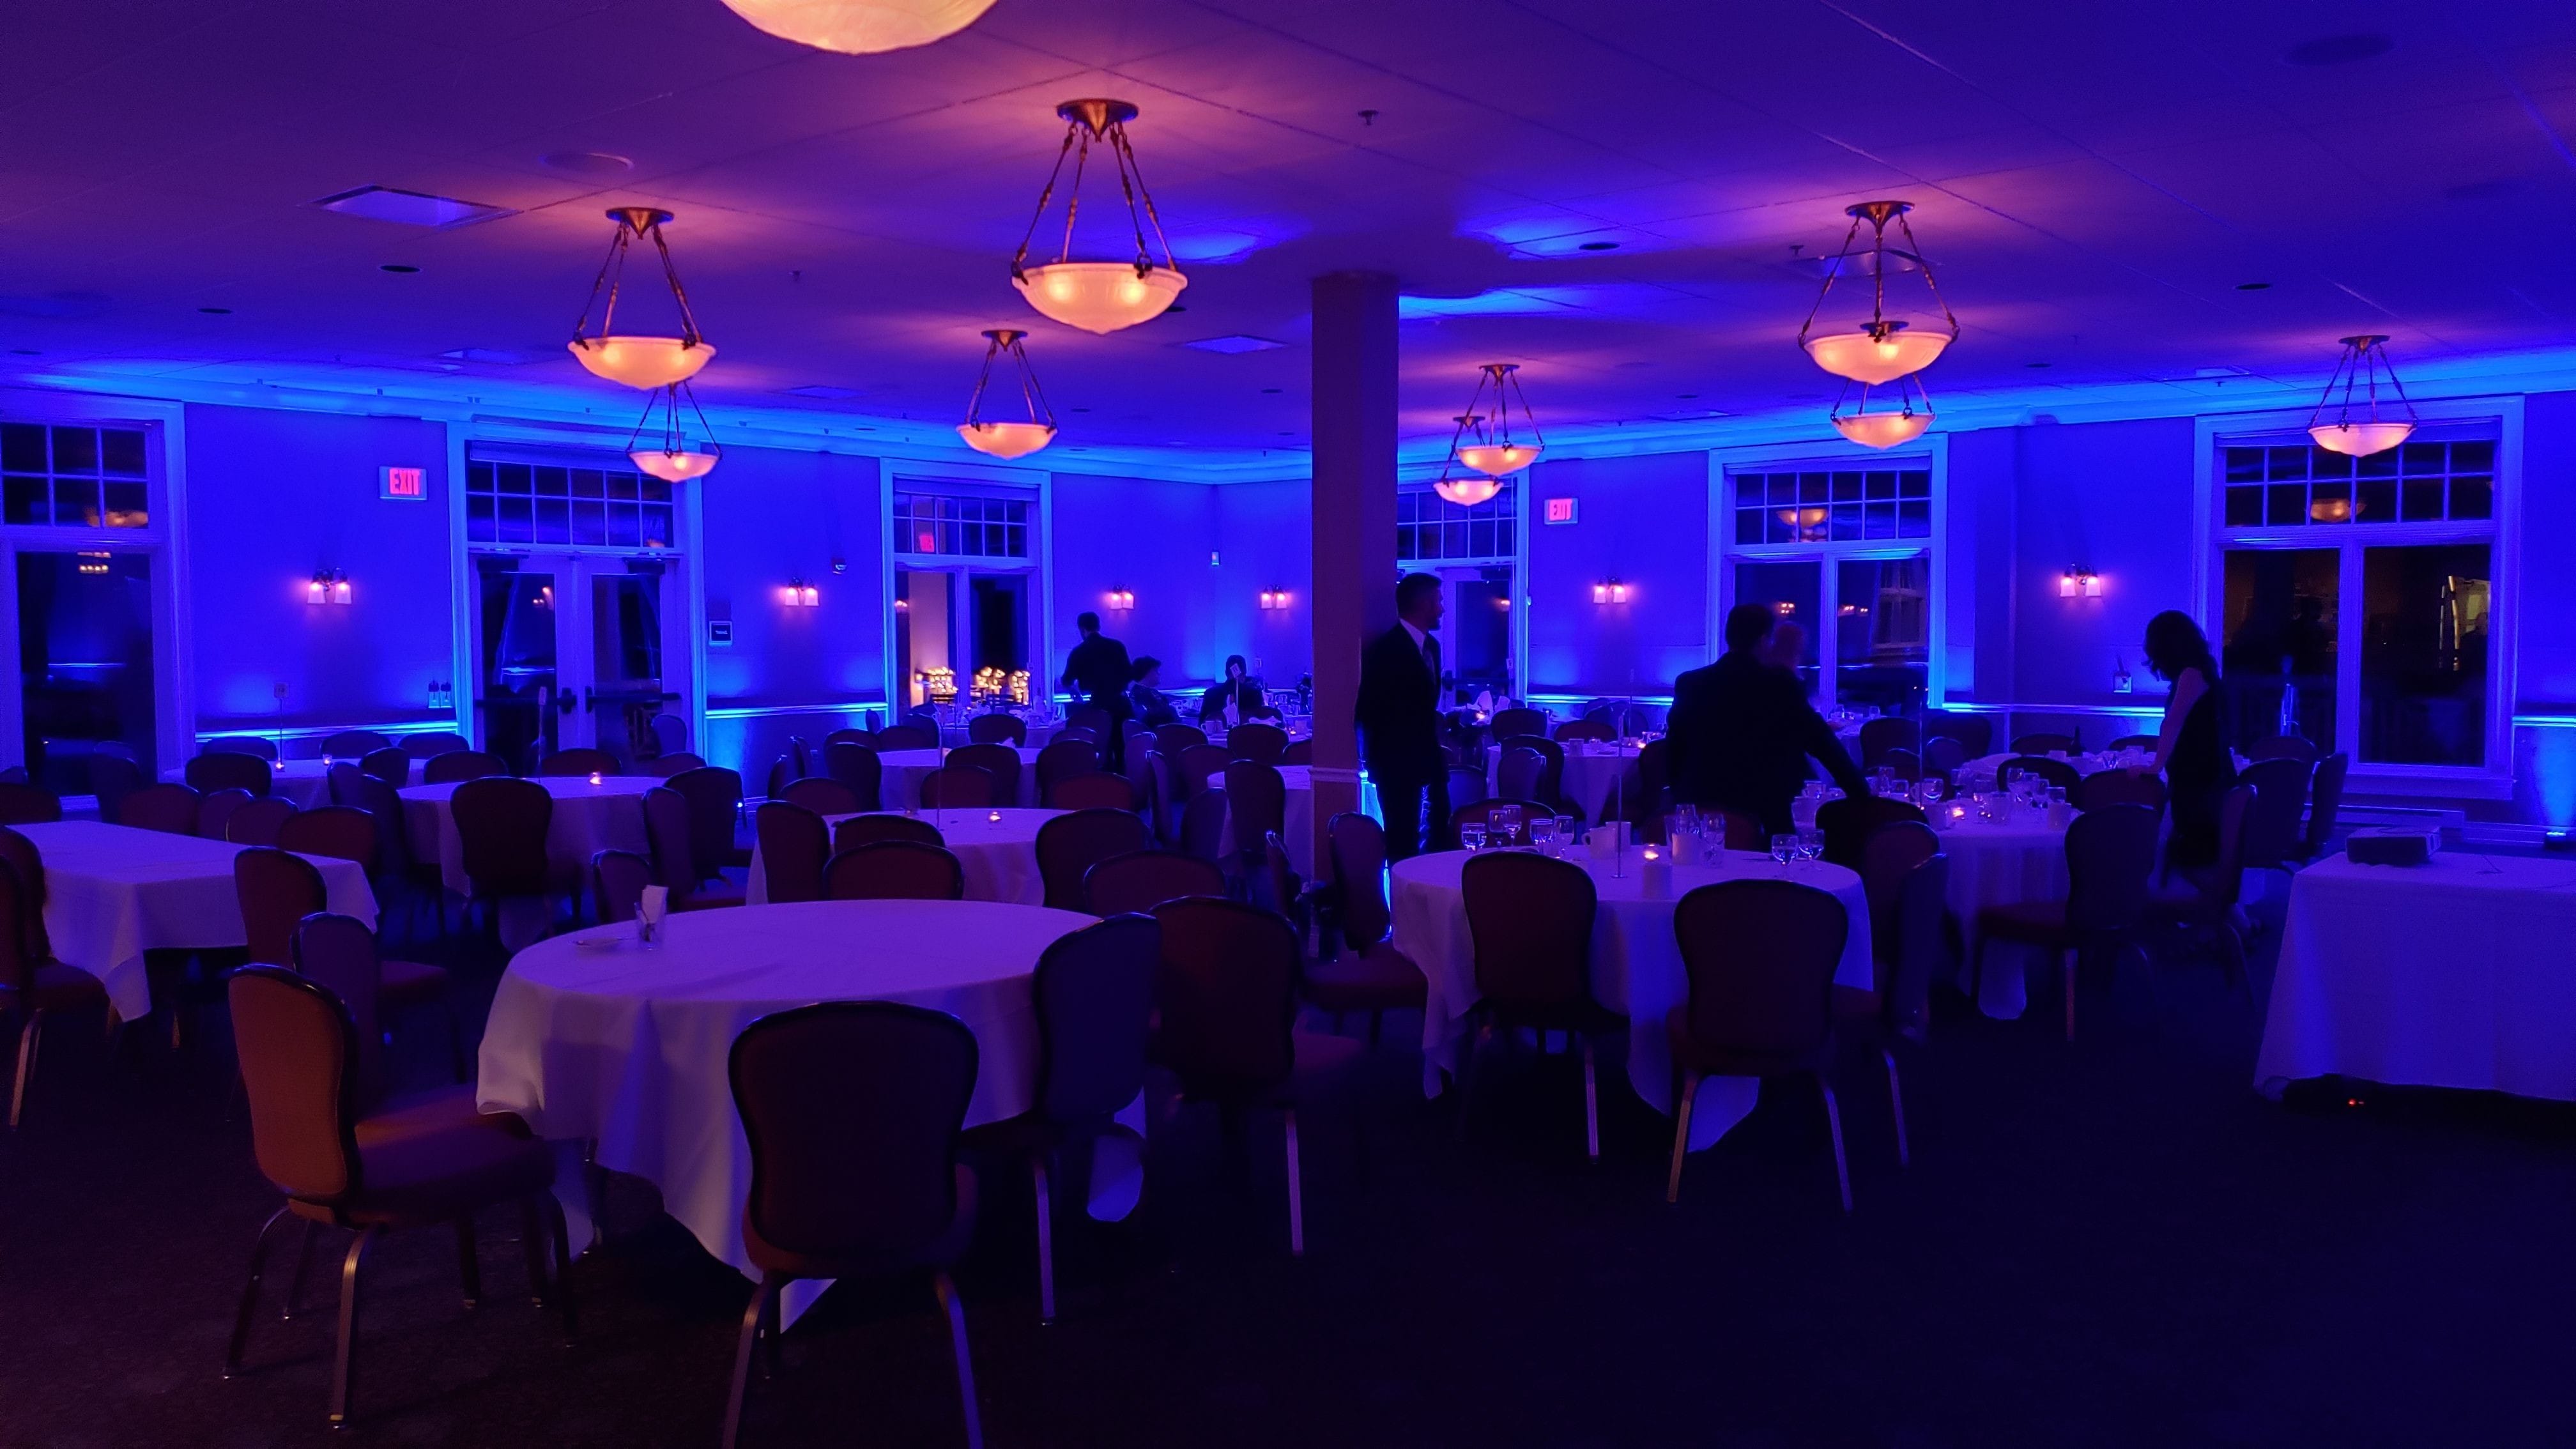 Northland Country Club. Up lighting in blue.